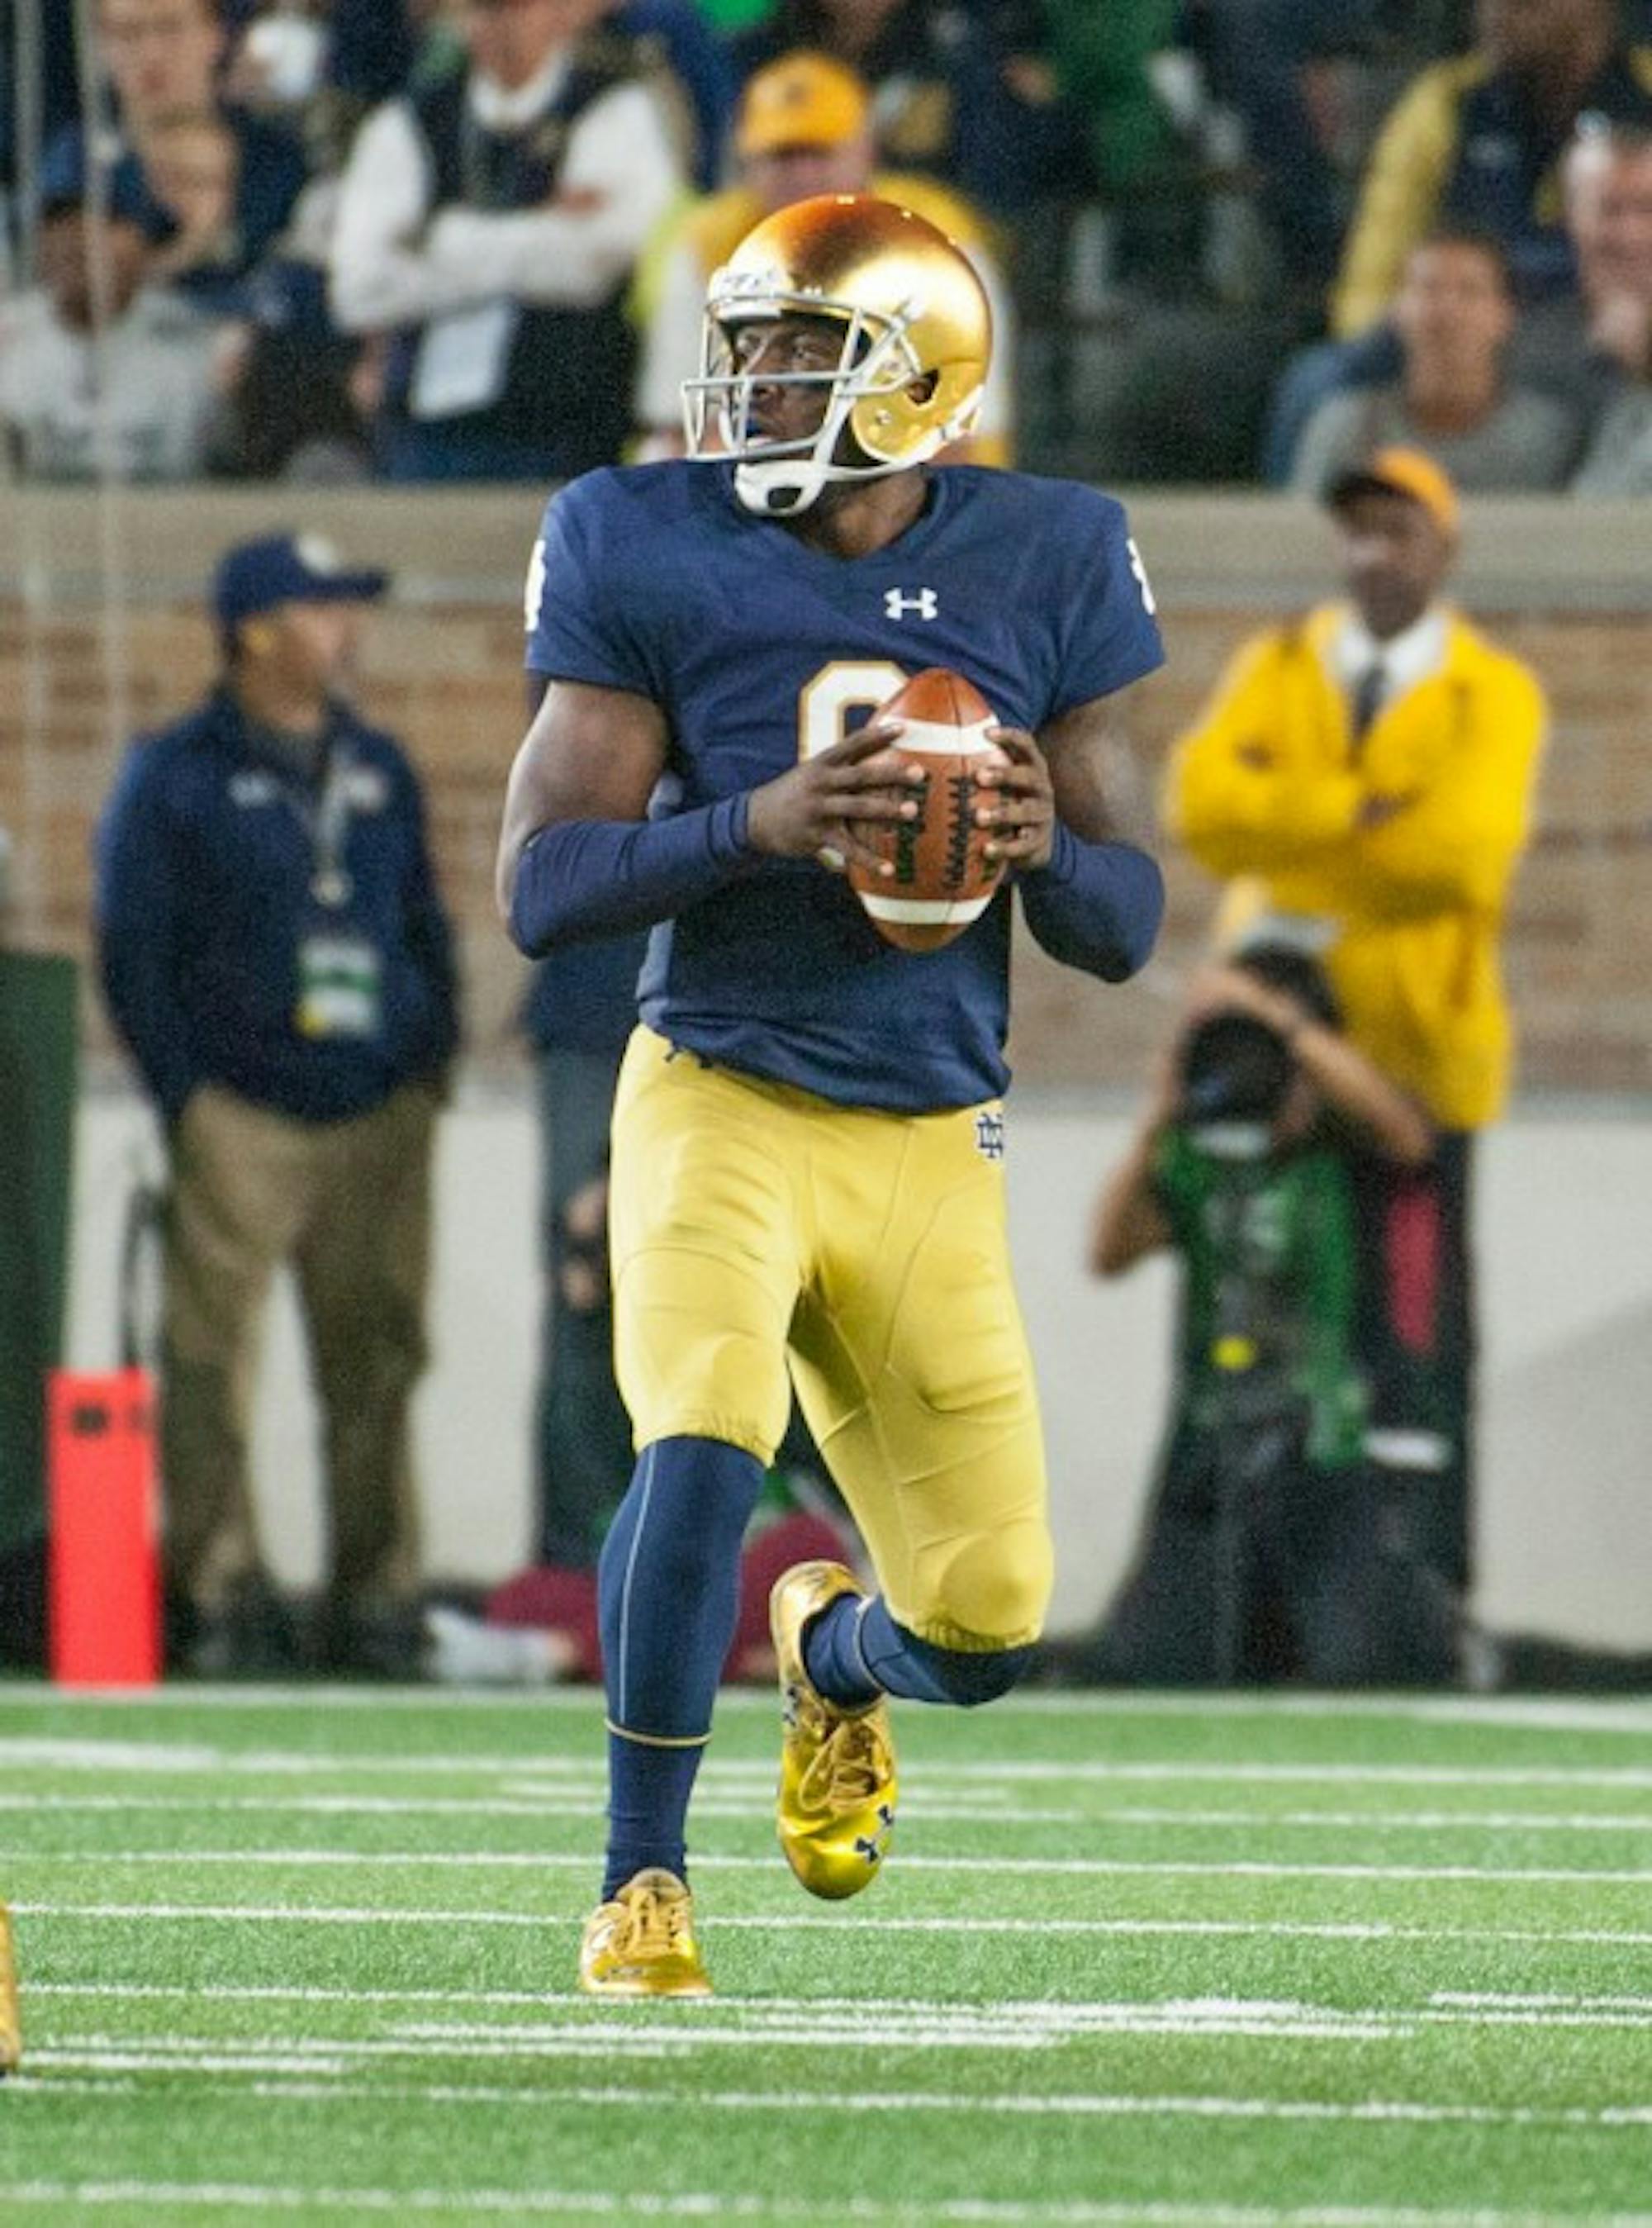 Senior quarterback Malik Zaire drops back to pass during Notre Dame’s 17-10 loss to Stanford on Oct. 15 at Notre Dame Stadium.